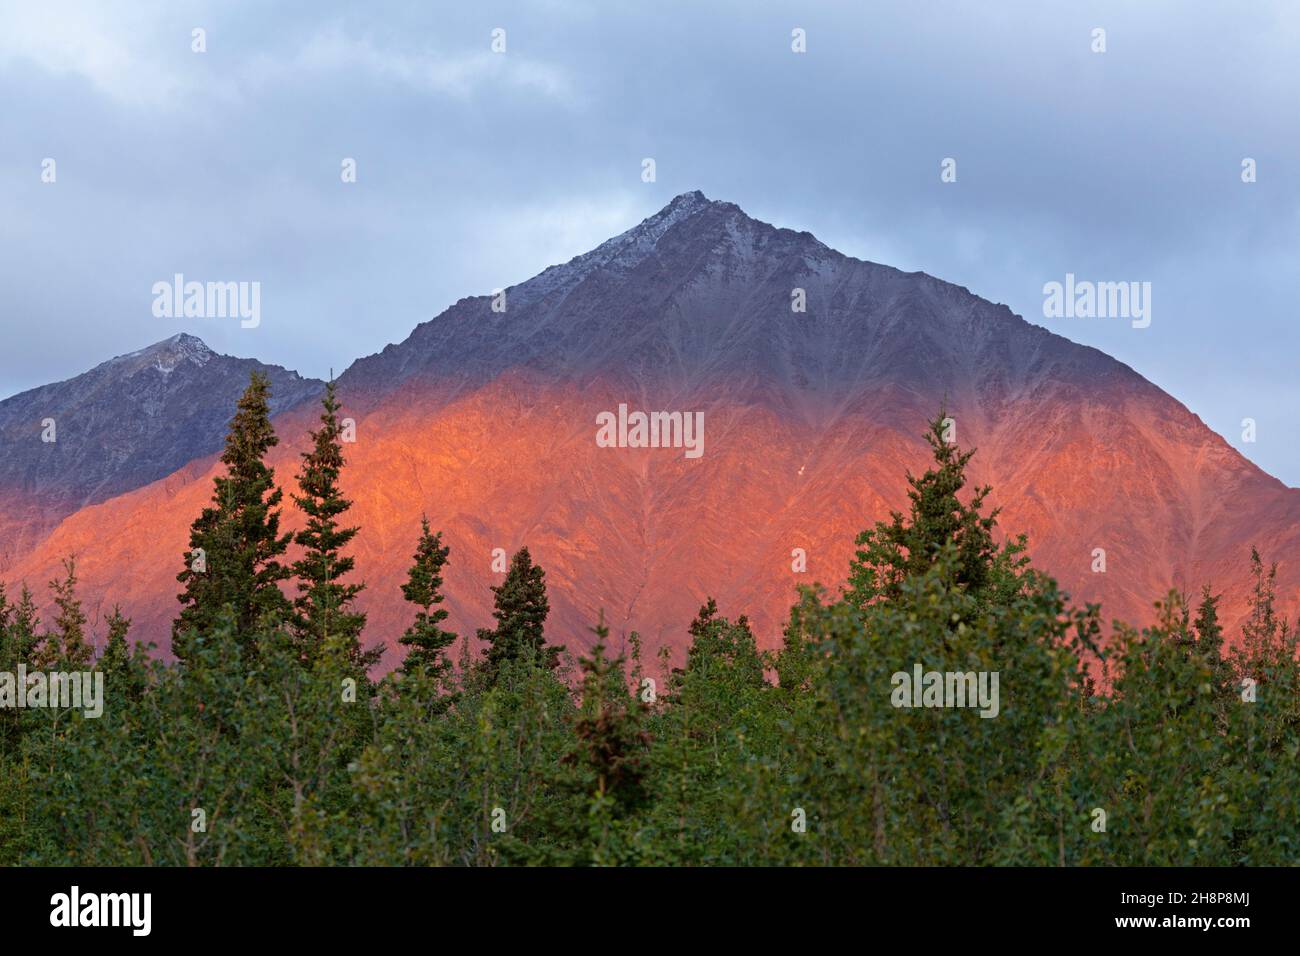 A sunlit mountain at Haines Junction in the Yukon, Canada. The peak in Kluane National Park and Reserve towers over forest. Stock Photo